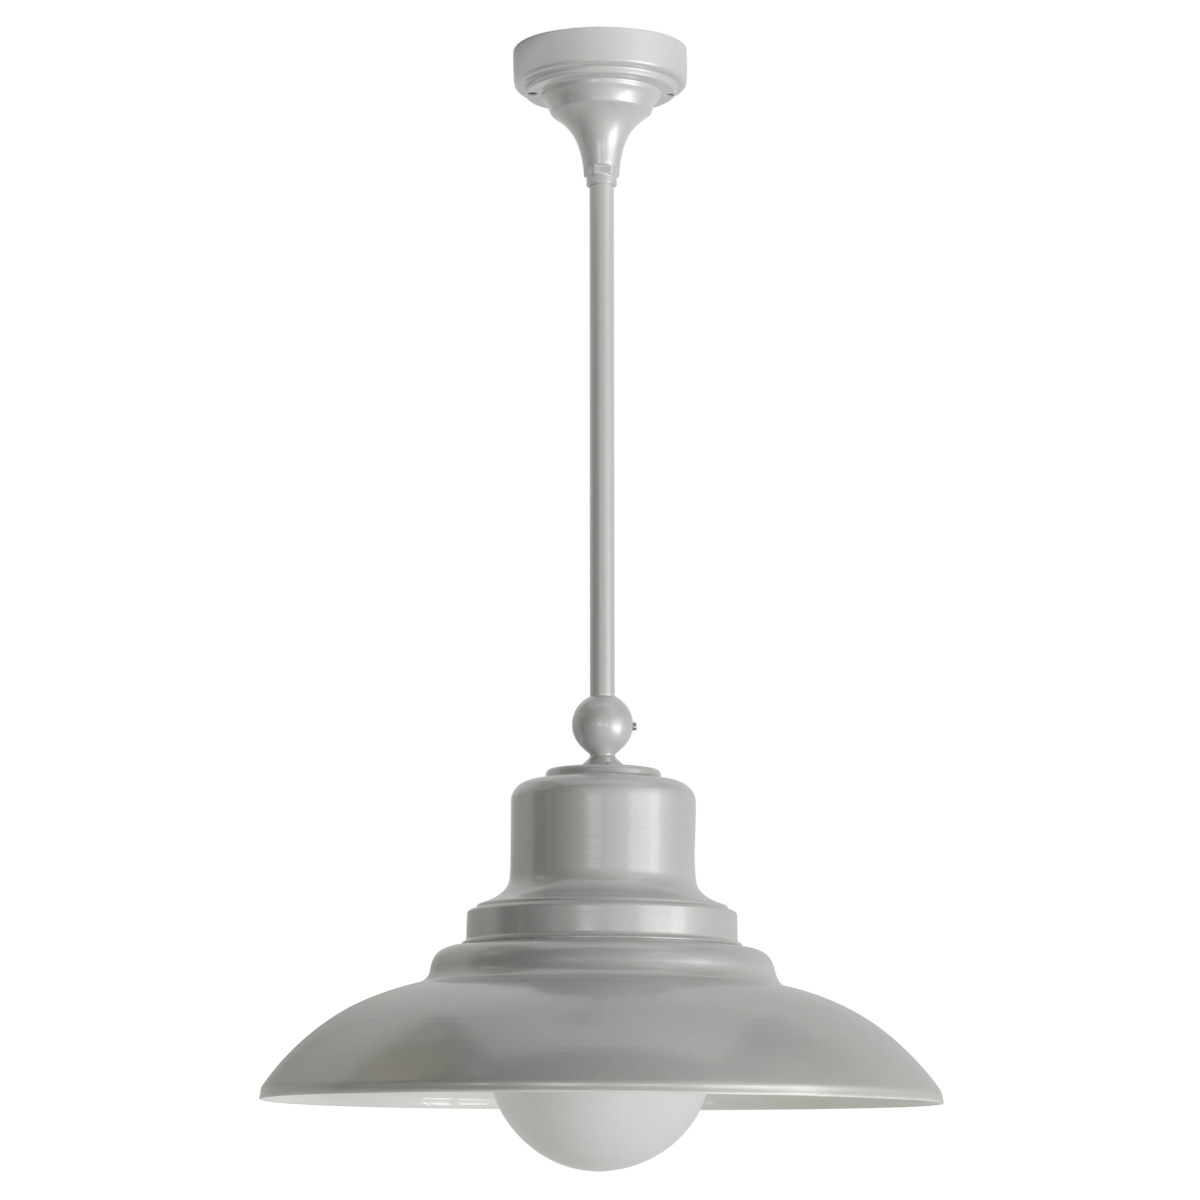 Factory-style Ceiling Lamp for Outdoors with Step-shade